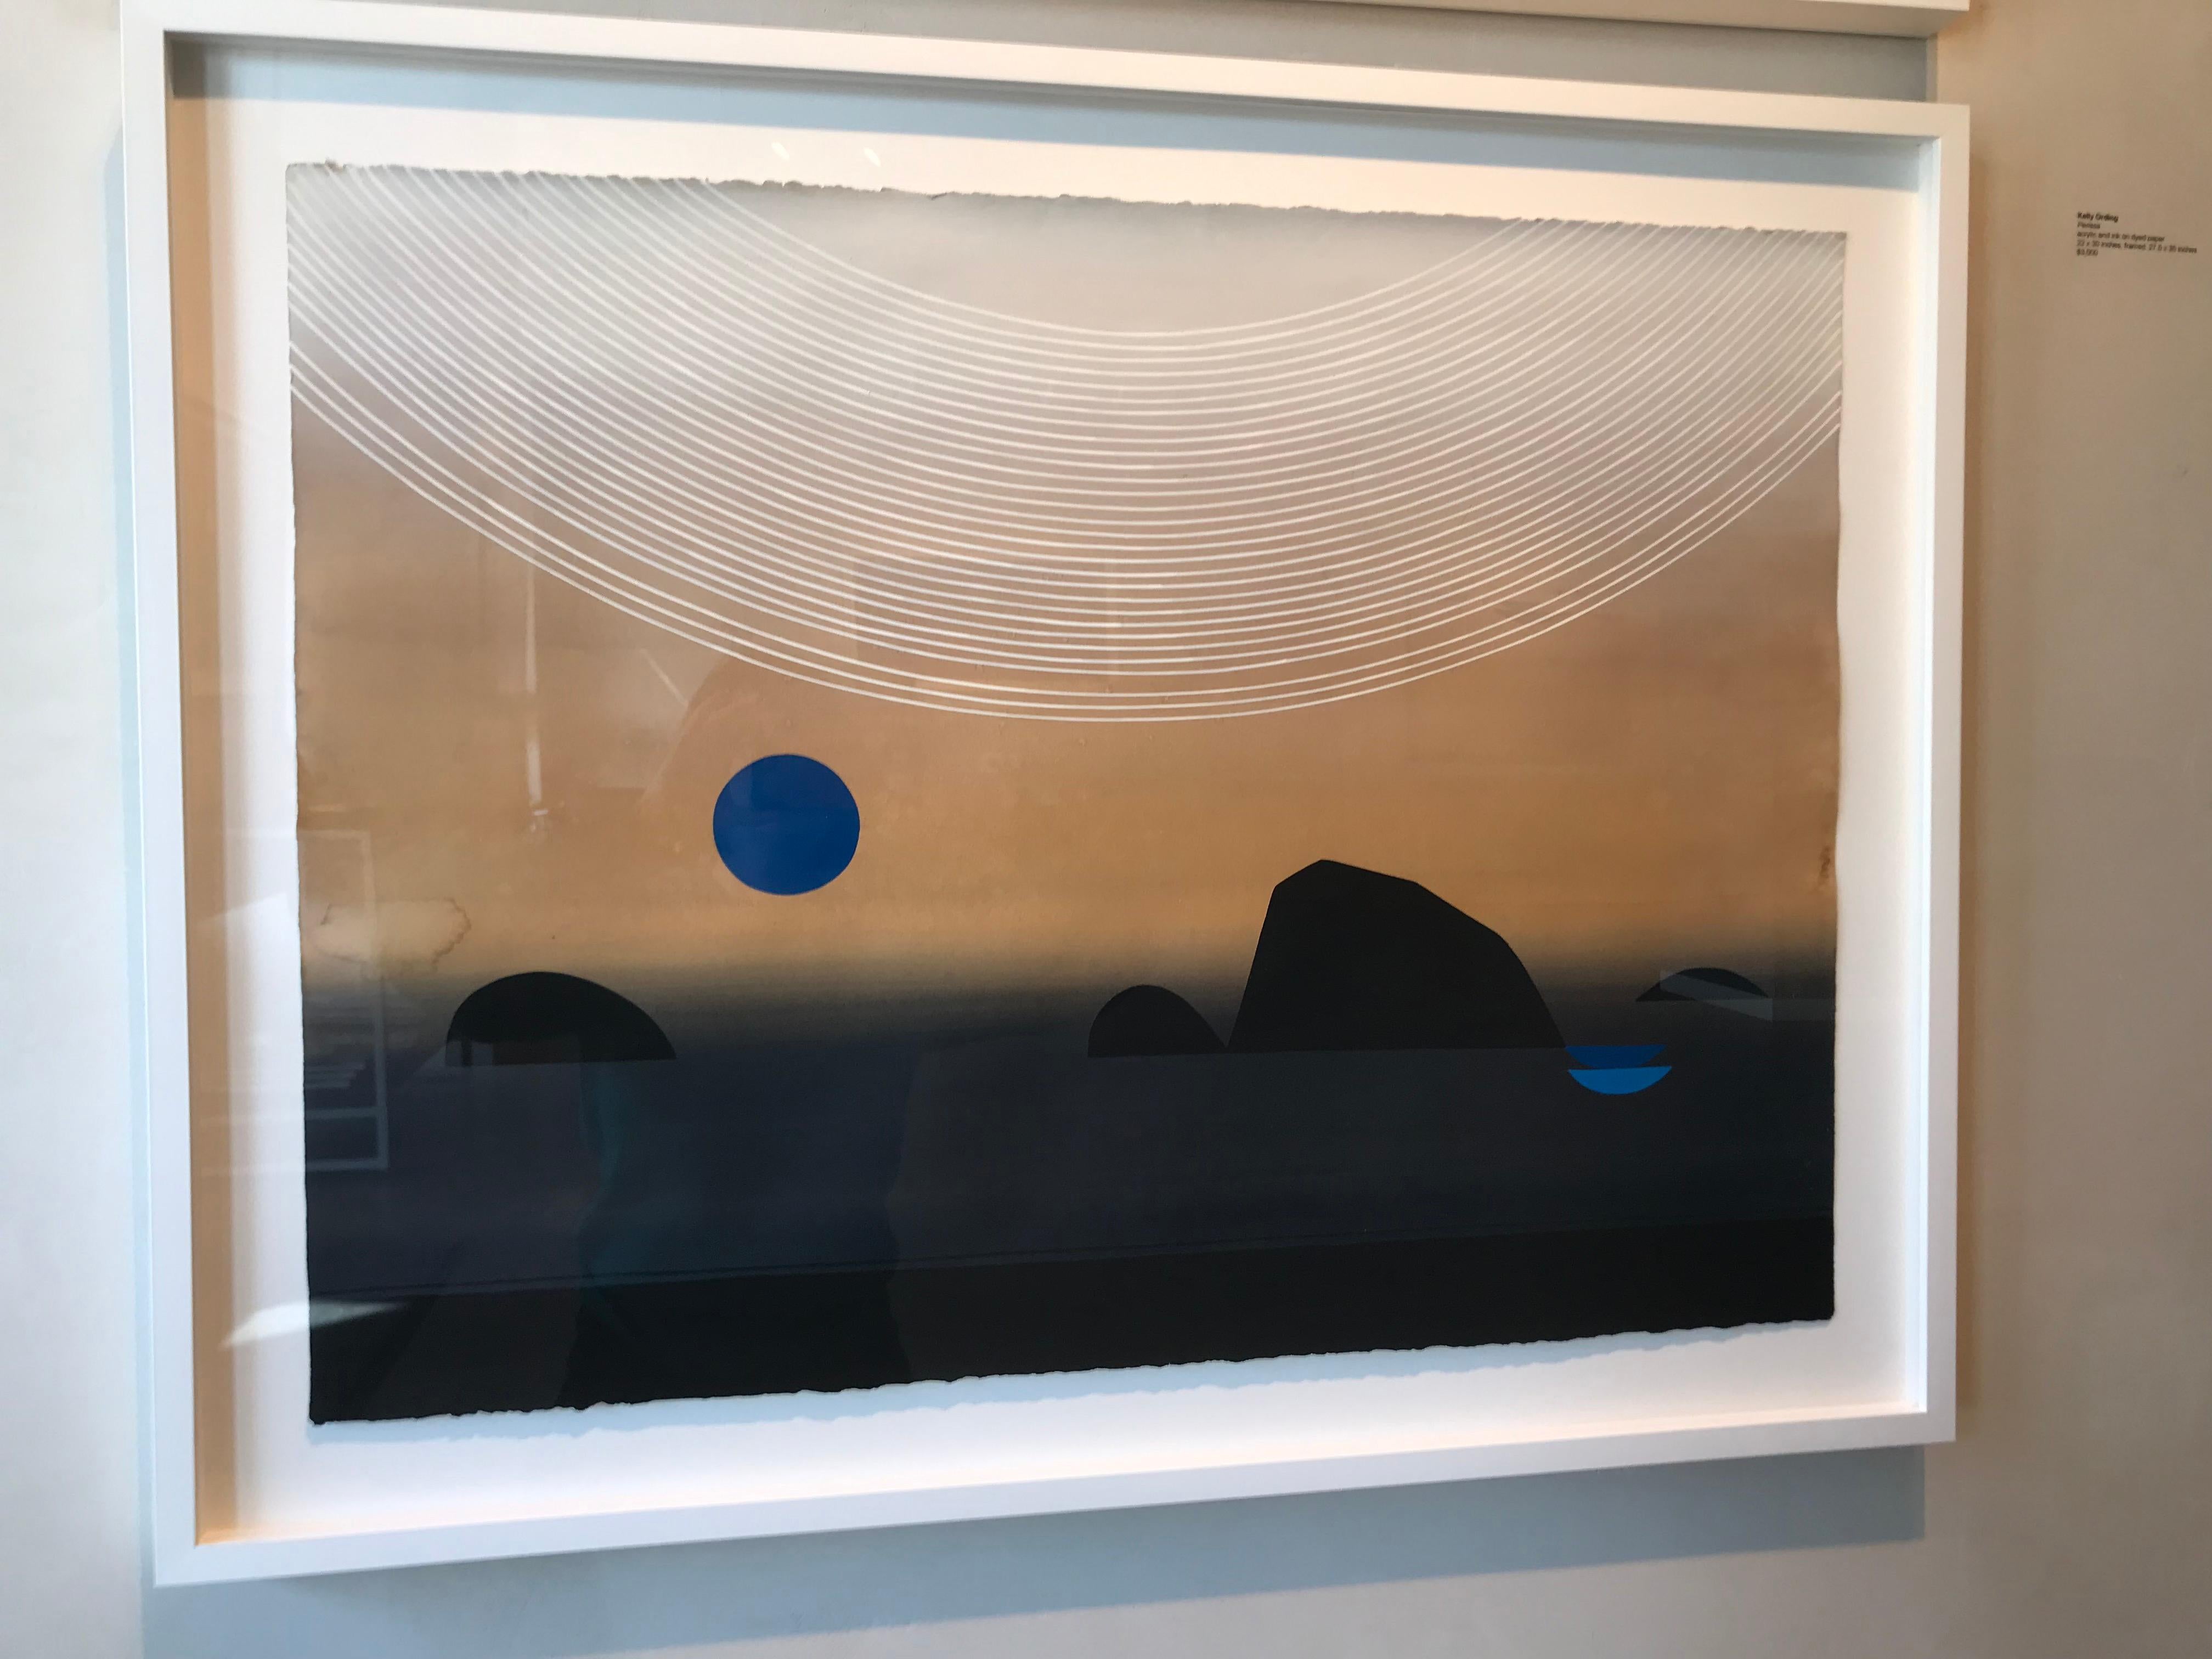 Perissa framed abstract landscape painting blue white and black on dyed paper (Abstrakt), Painting, von Kelly Ording